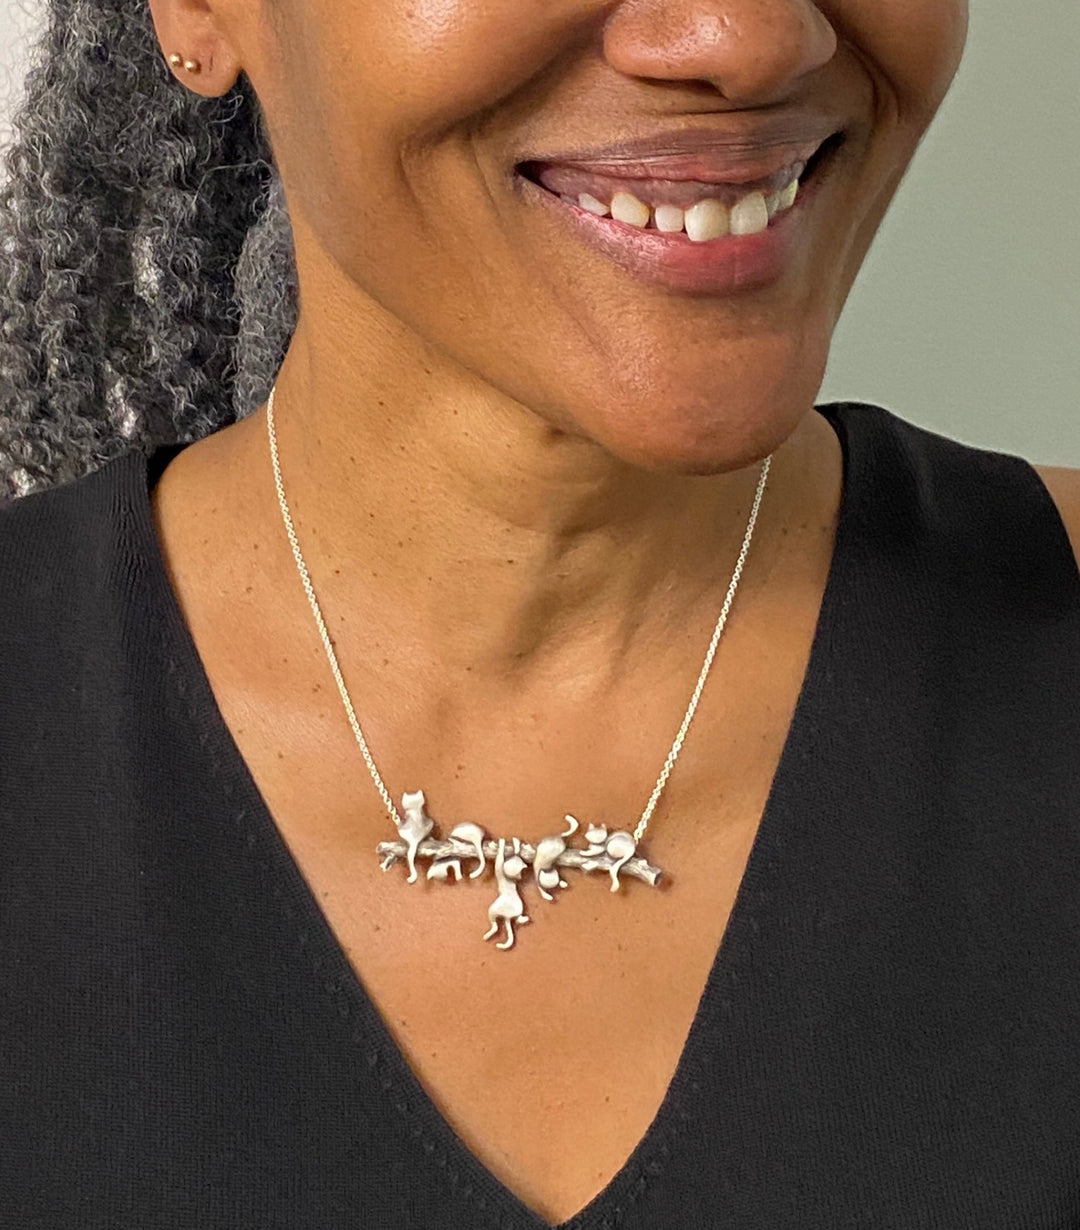 A woman wearing an endearing silver necklace with 5 playful cats on a branch. Adorable!